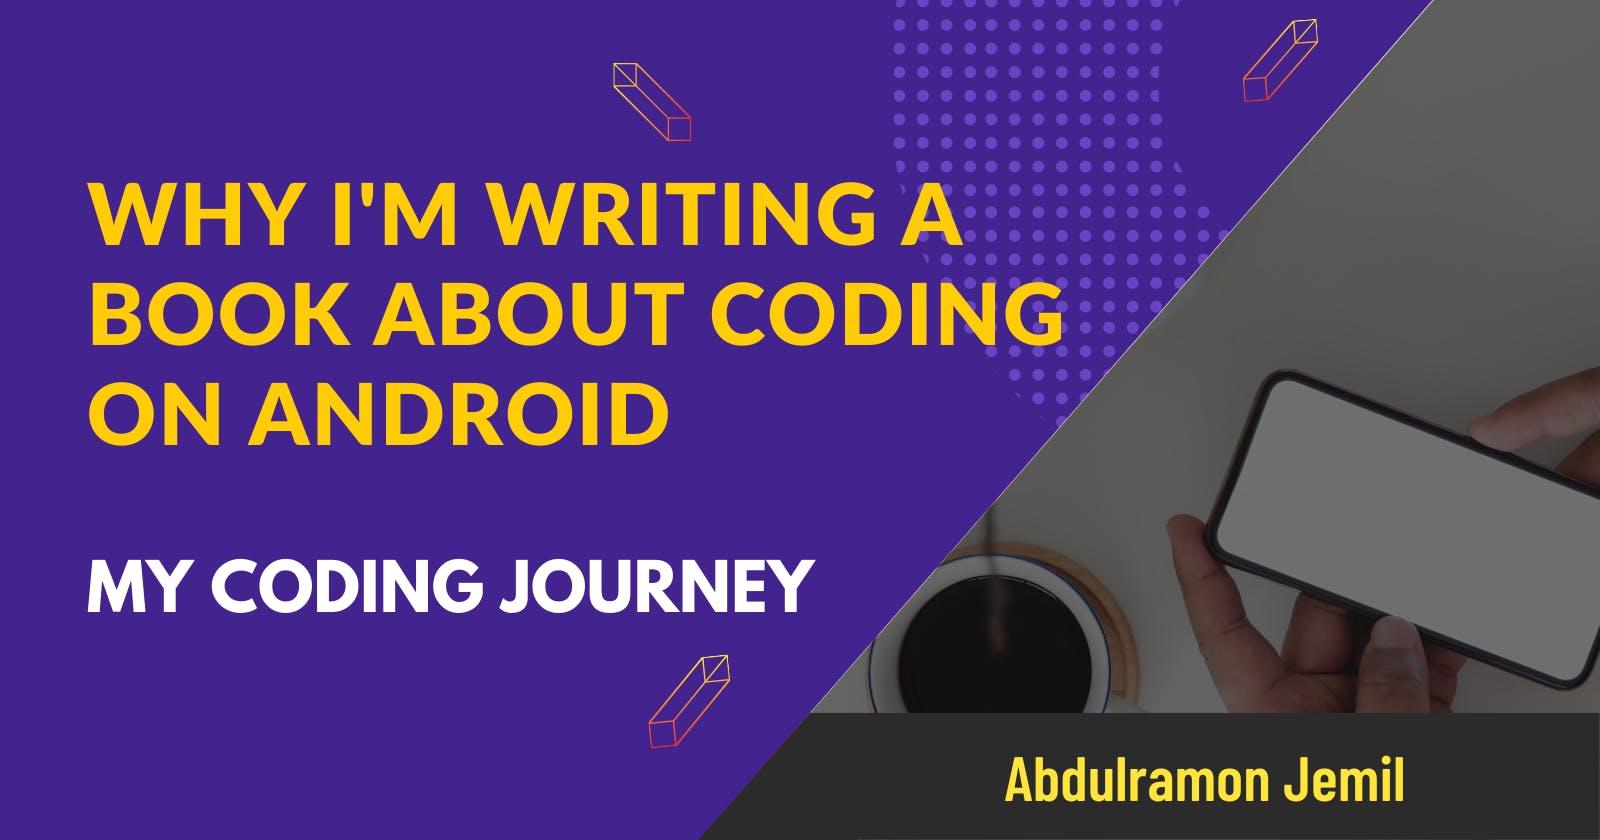 Why I'm writing a book about coding on Android - My coding journey